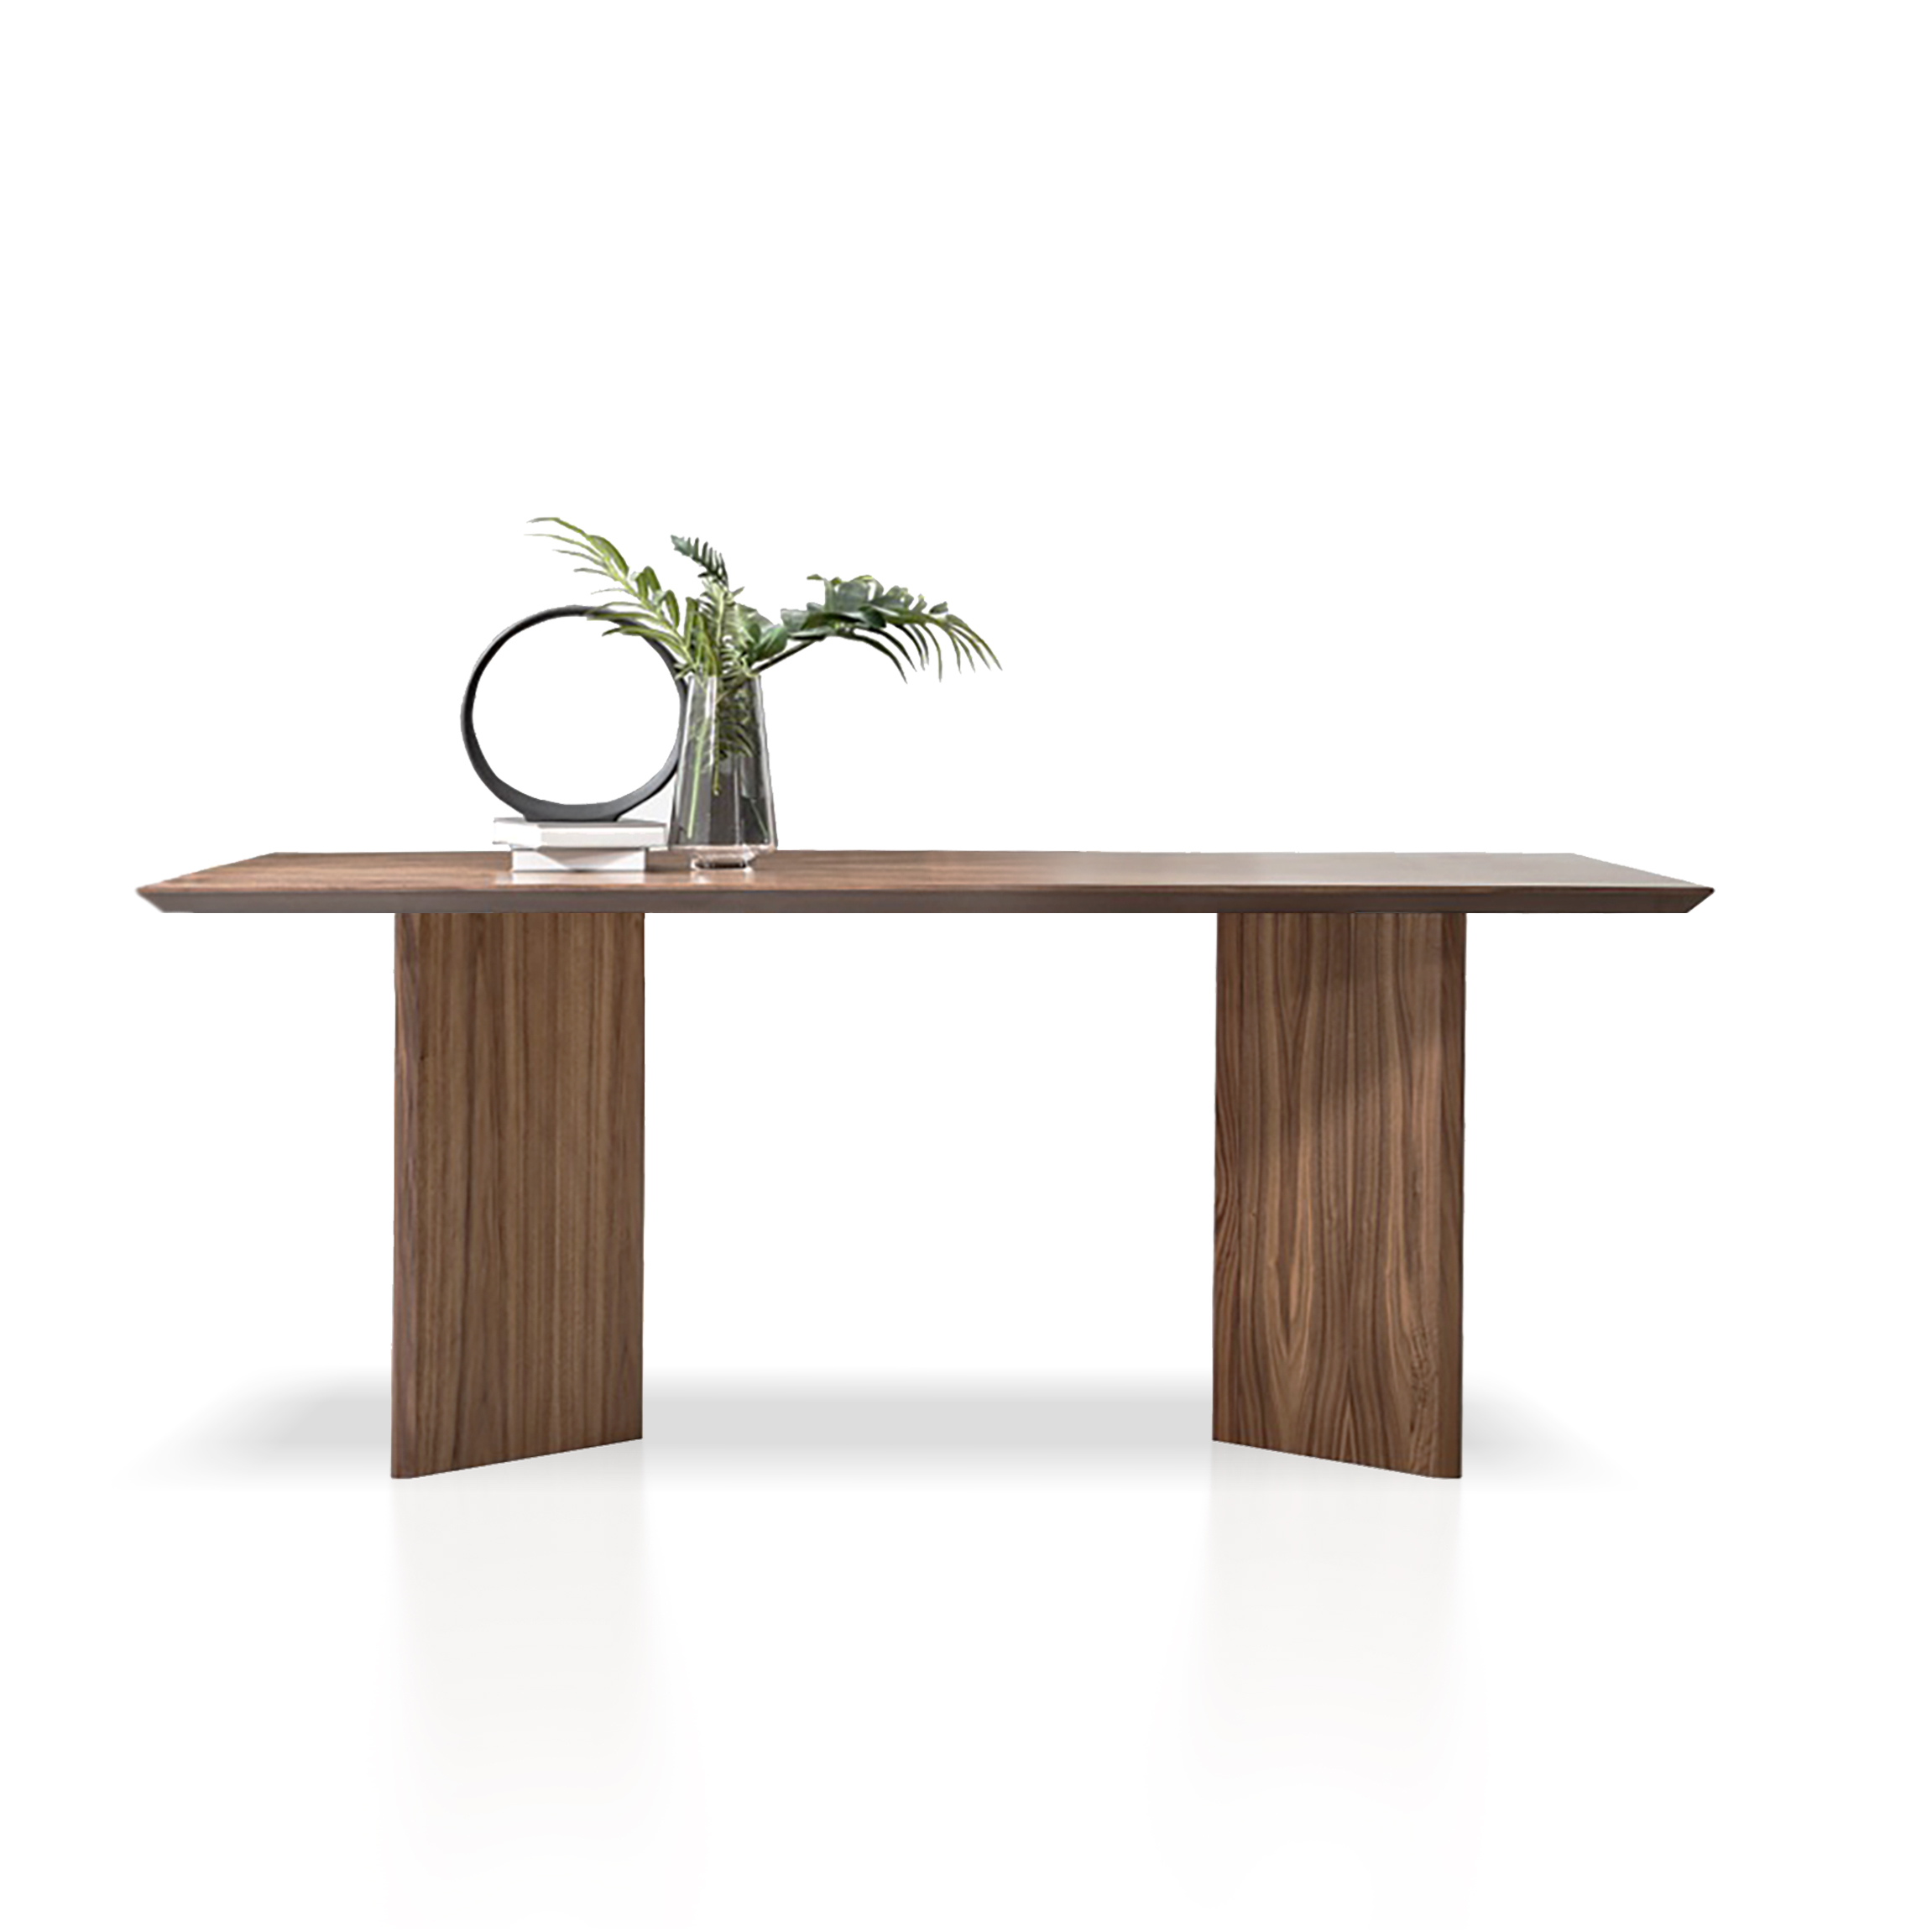 Spacious 220 cm x 100 cm size of the Heritage Dining Table